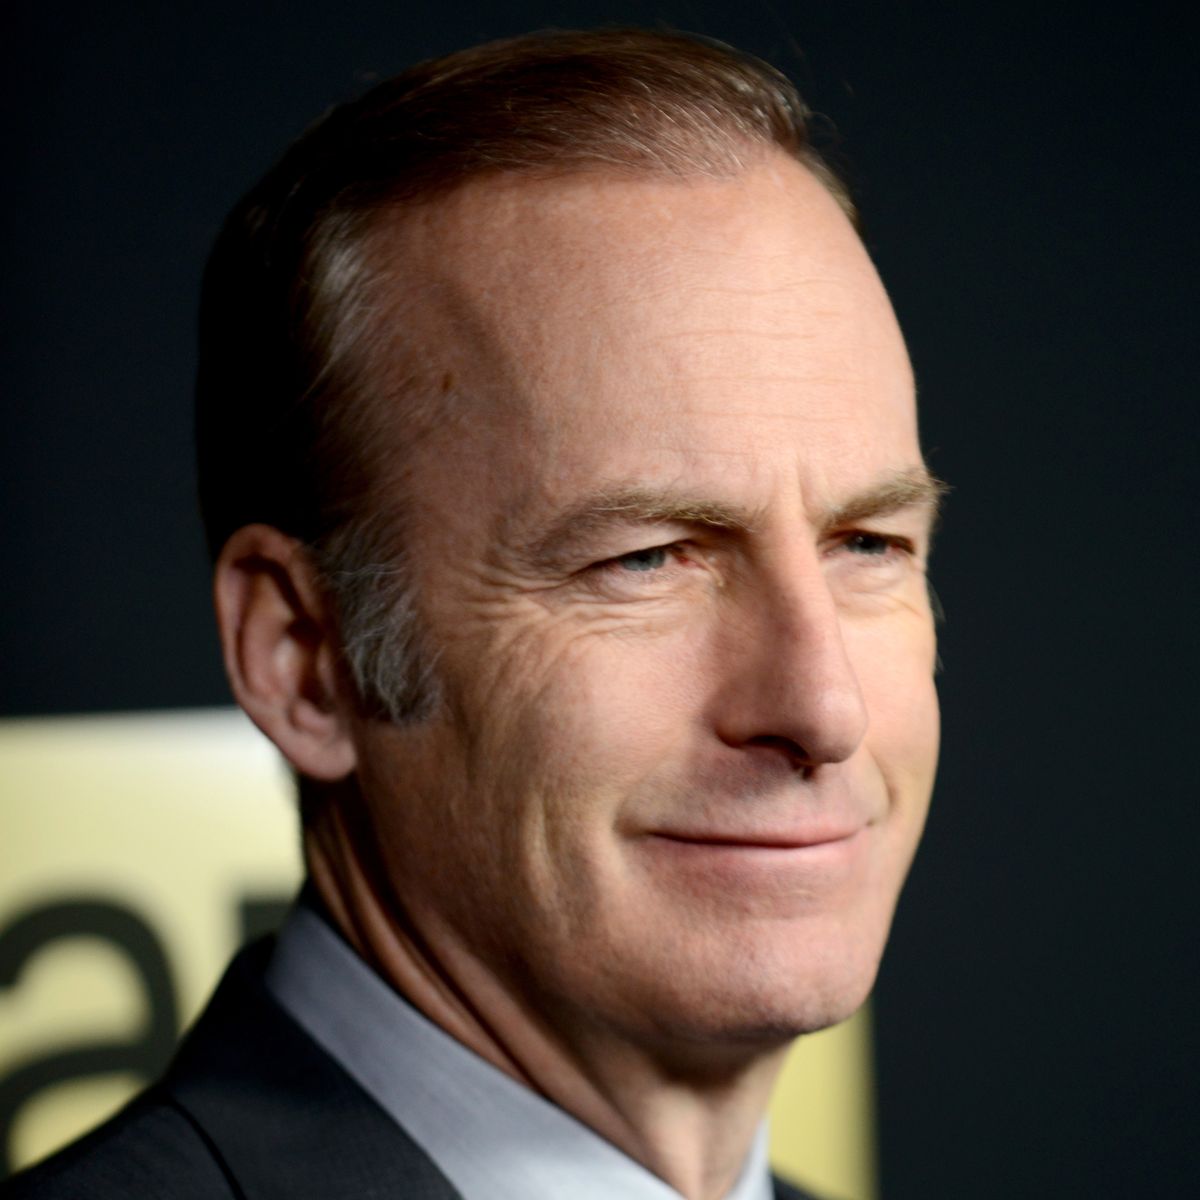 CULVER CITY, CA - FEBRUARY 02: Actor Bob Odenkirk arrives for the Premiere Of AMC's "Better Call Saul" Season 2 held at ArcLight Cinemas on February 2, 2016 in Culver City, California. (Photo by Albert L. Ortega/Getty Images)